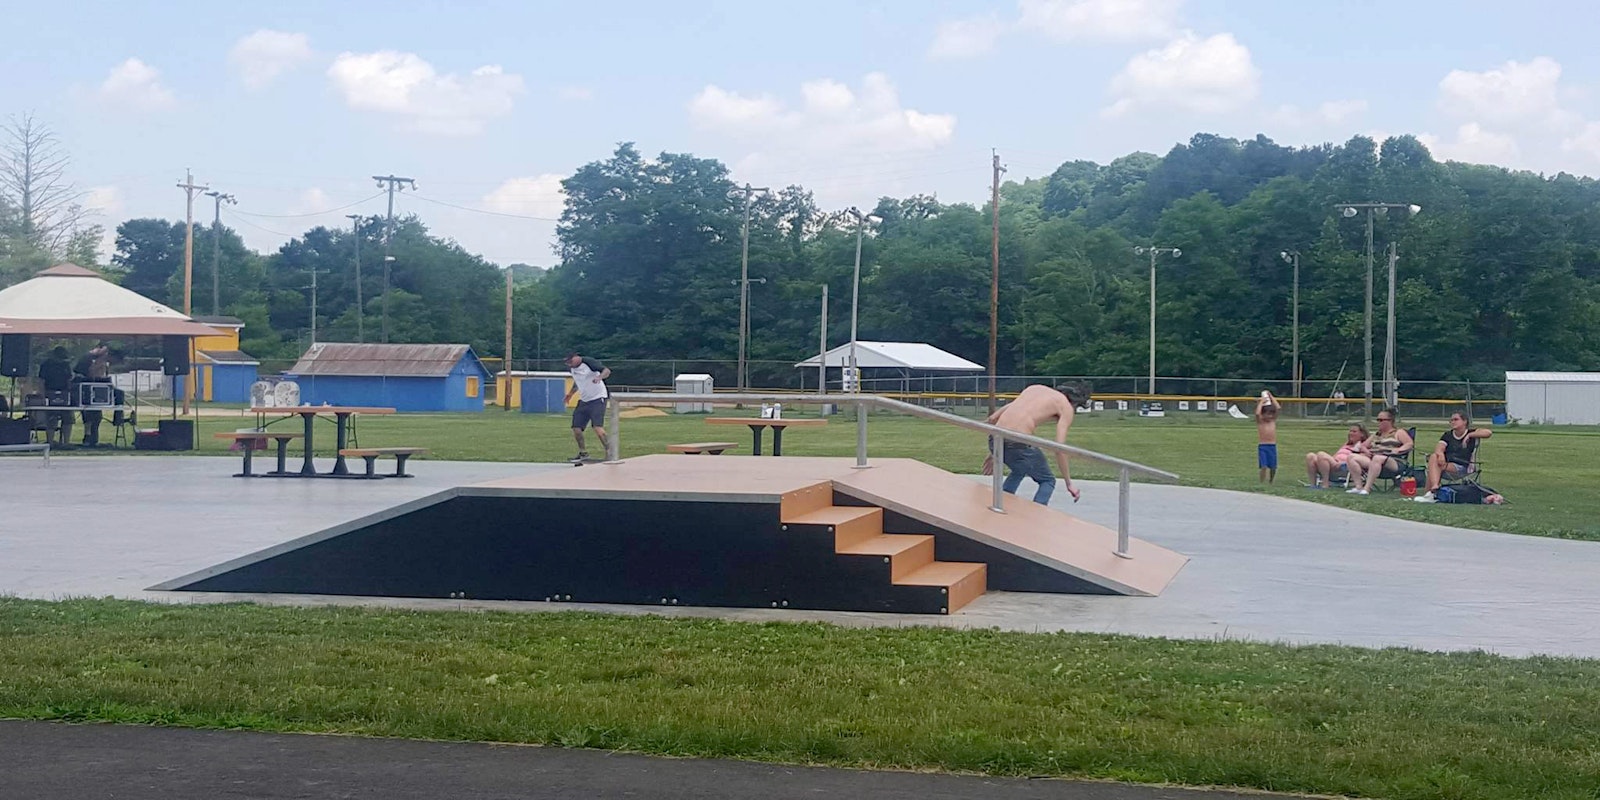 Congratulations to the winners of the Skating Competition on June 24